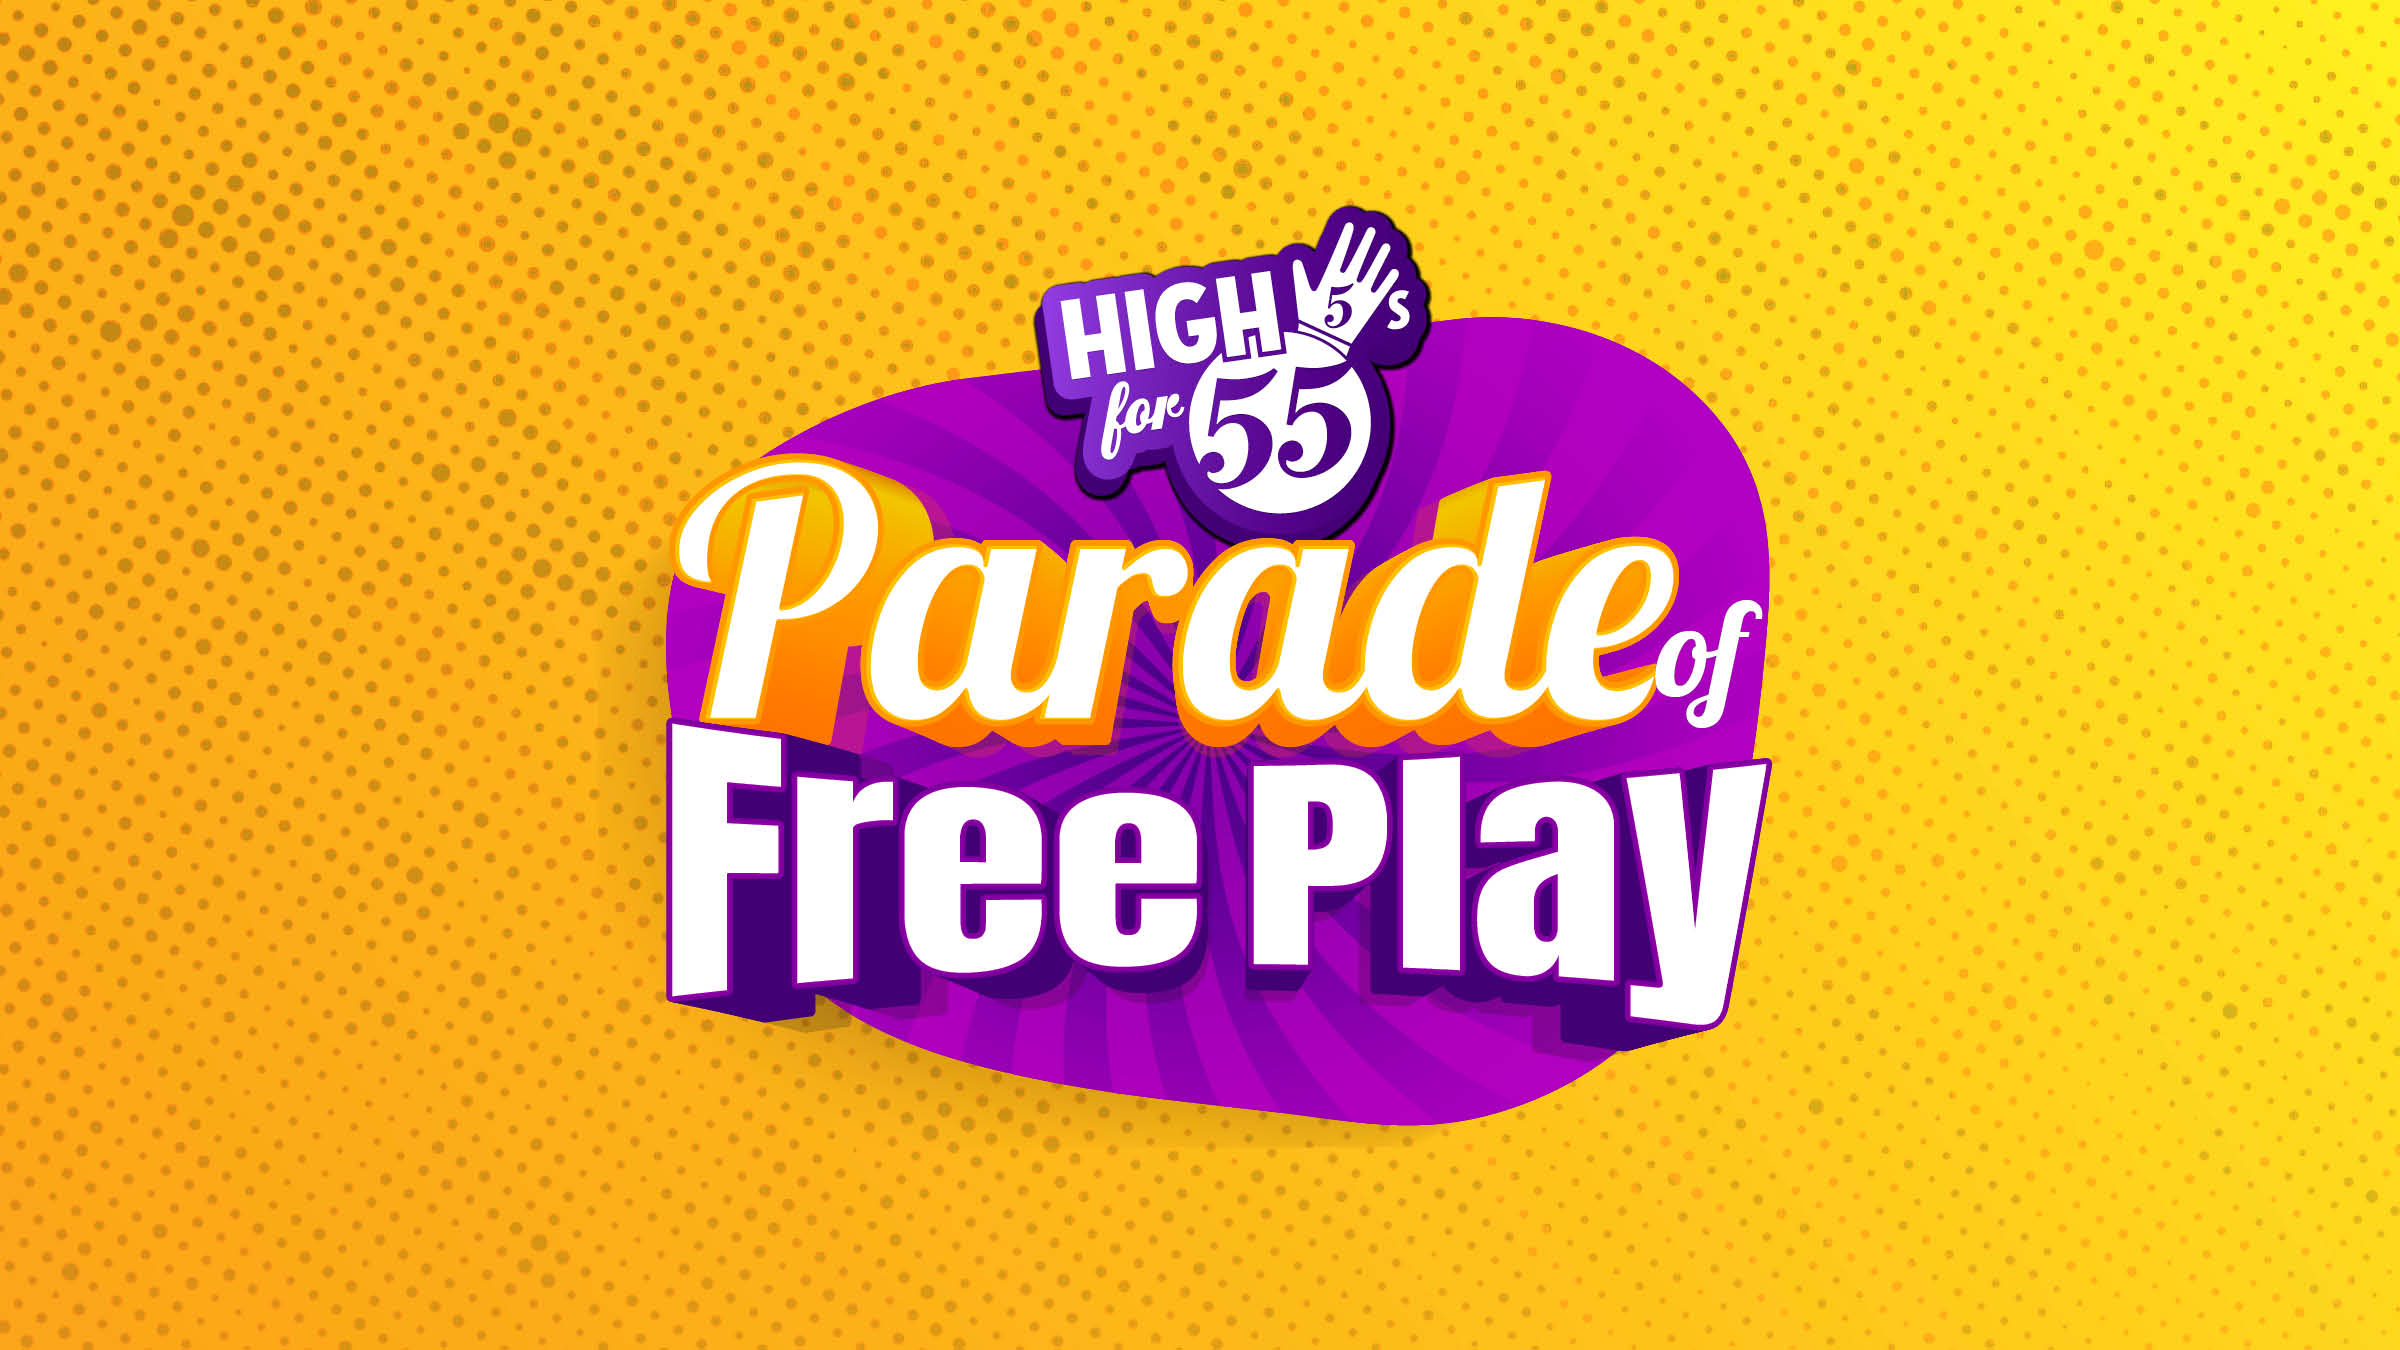 High 5s for 55’s – PARADE OF FREEPLAY